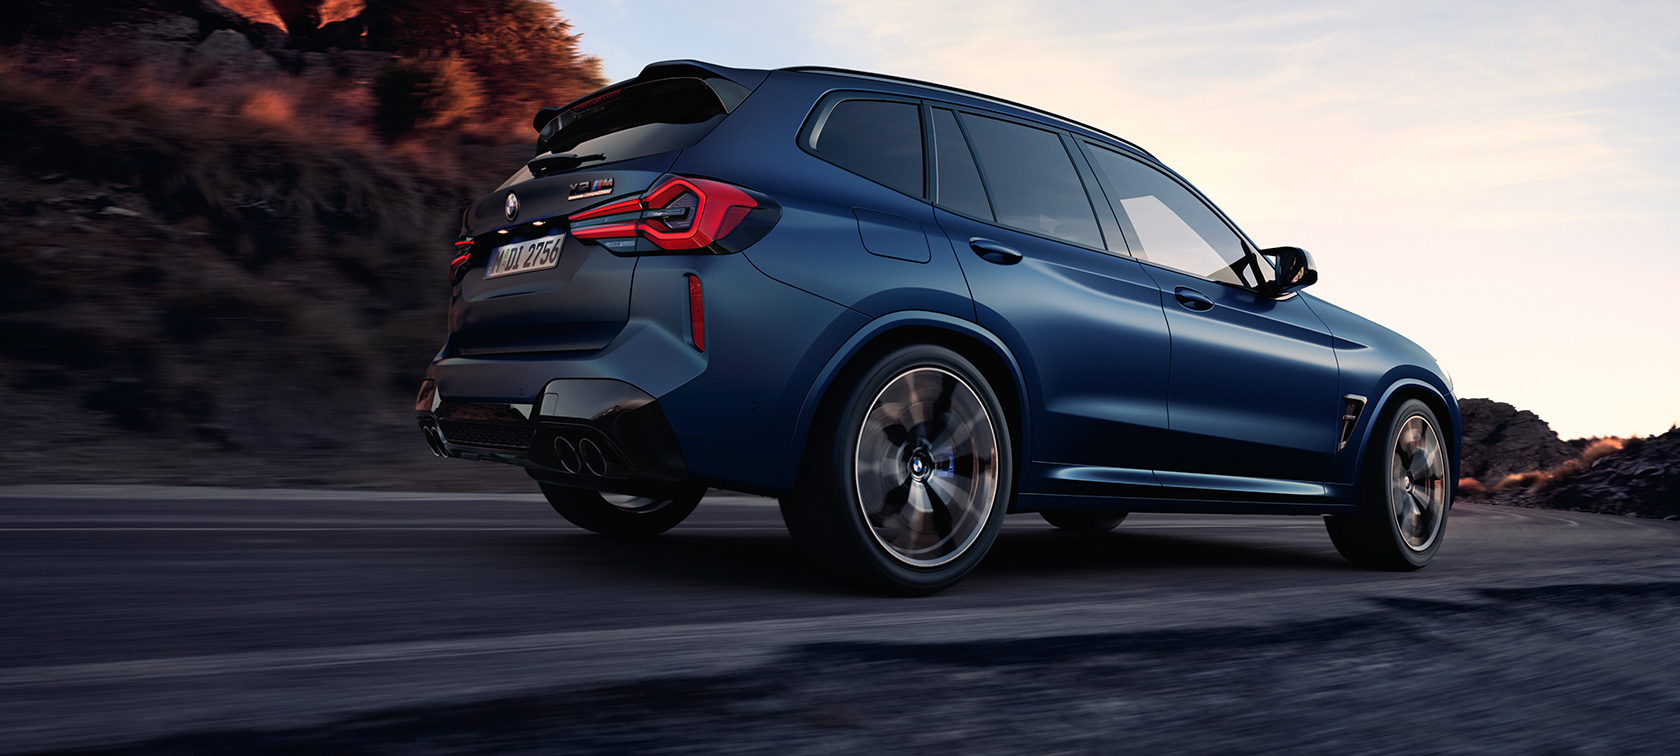 The latest member of the M Family - BMW X3 M